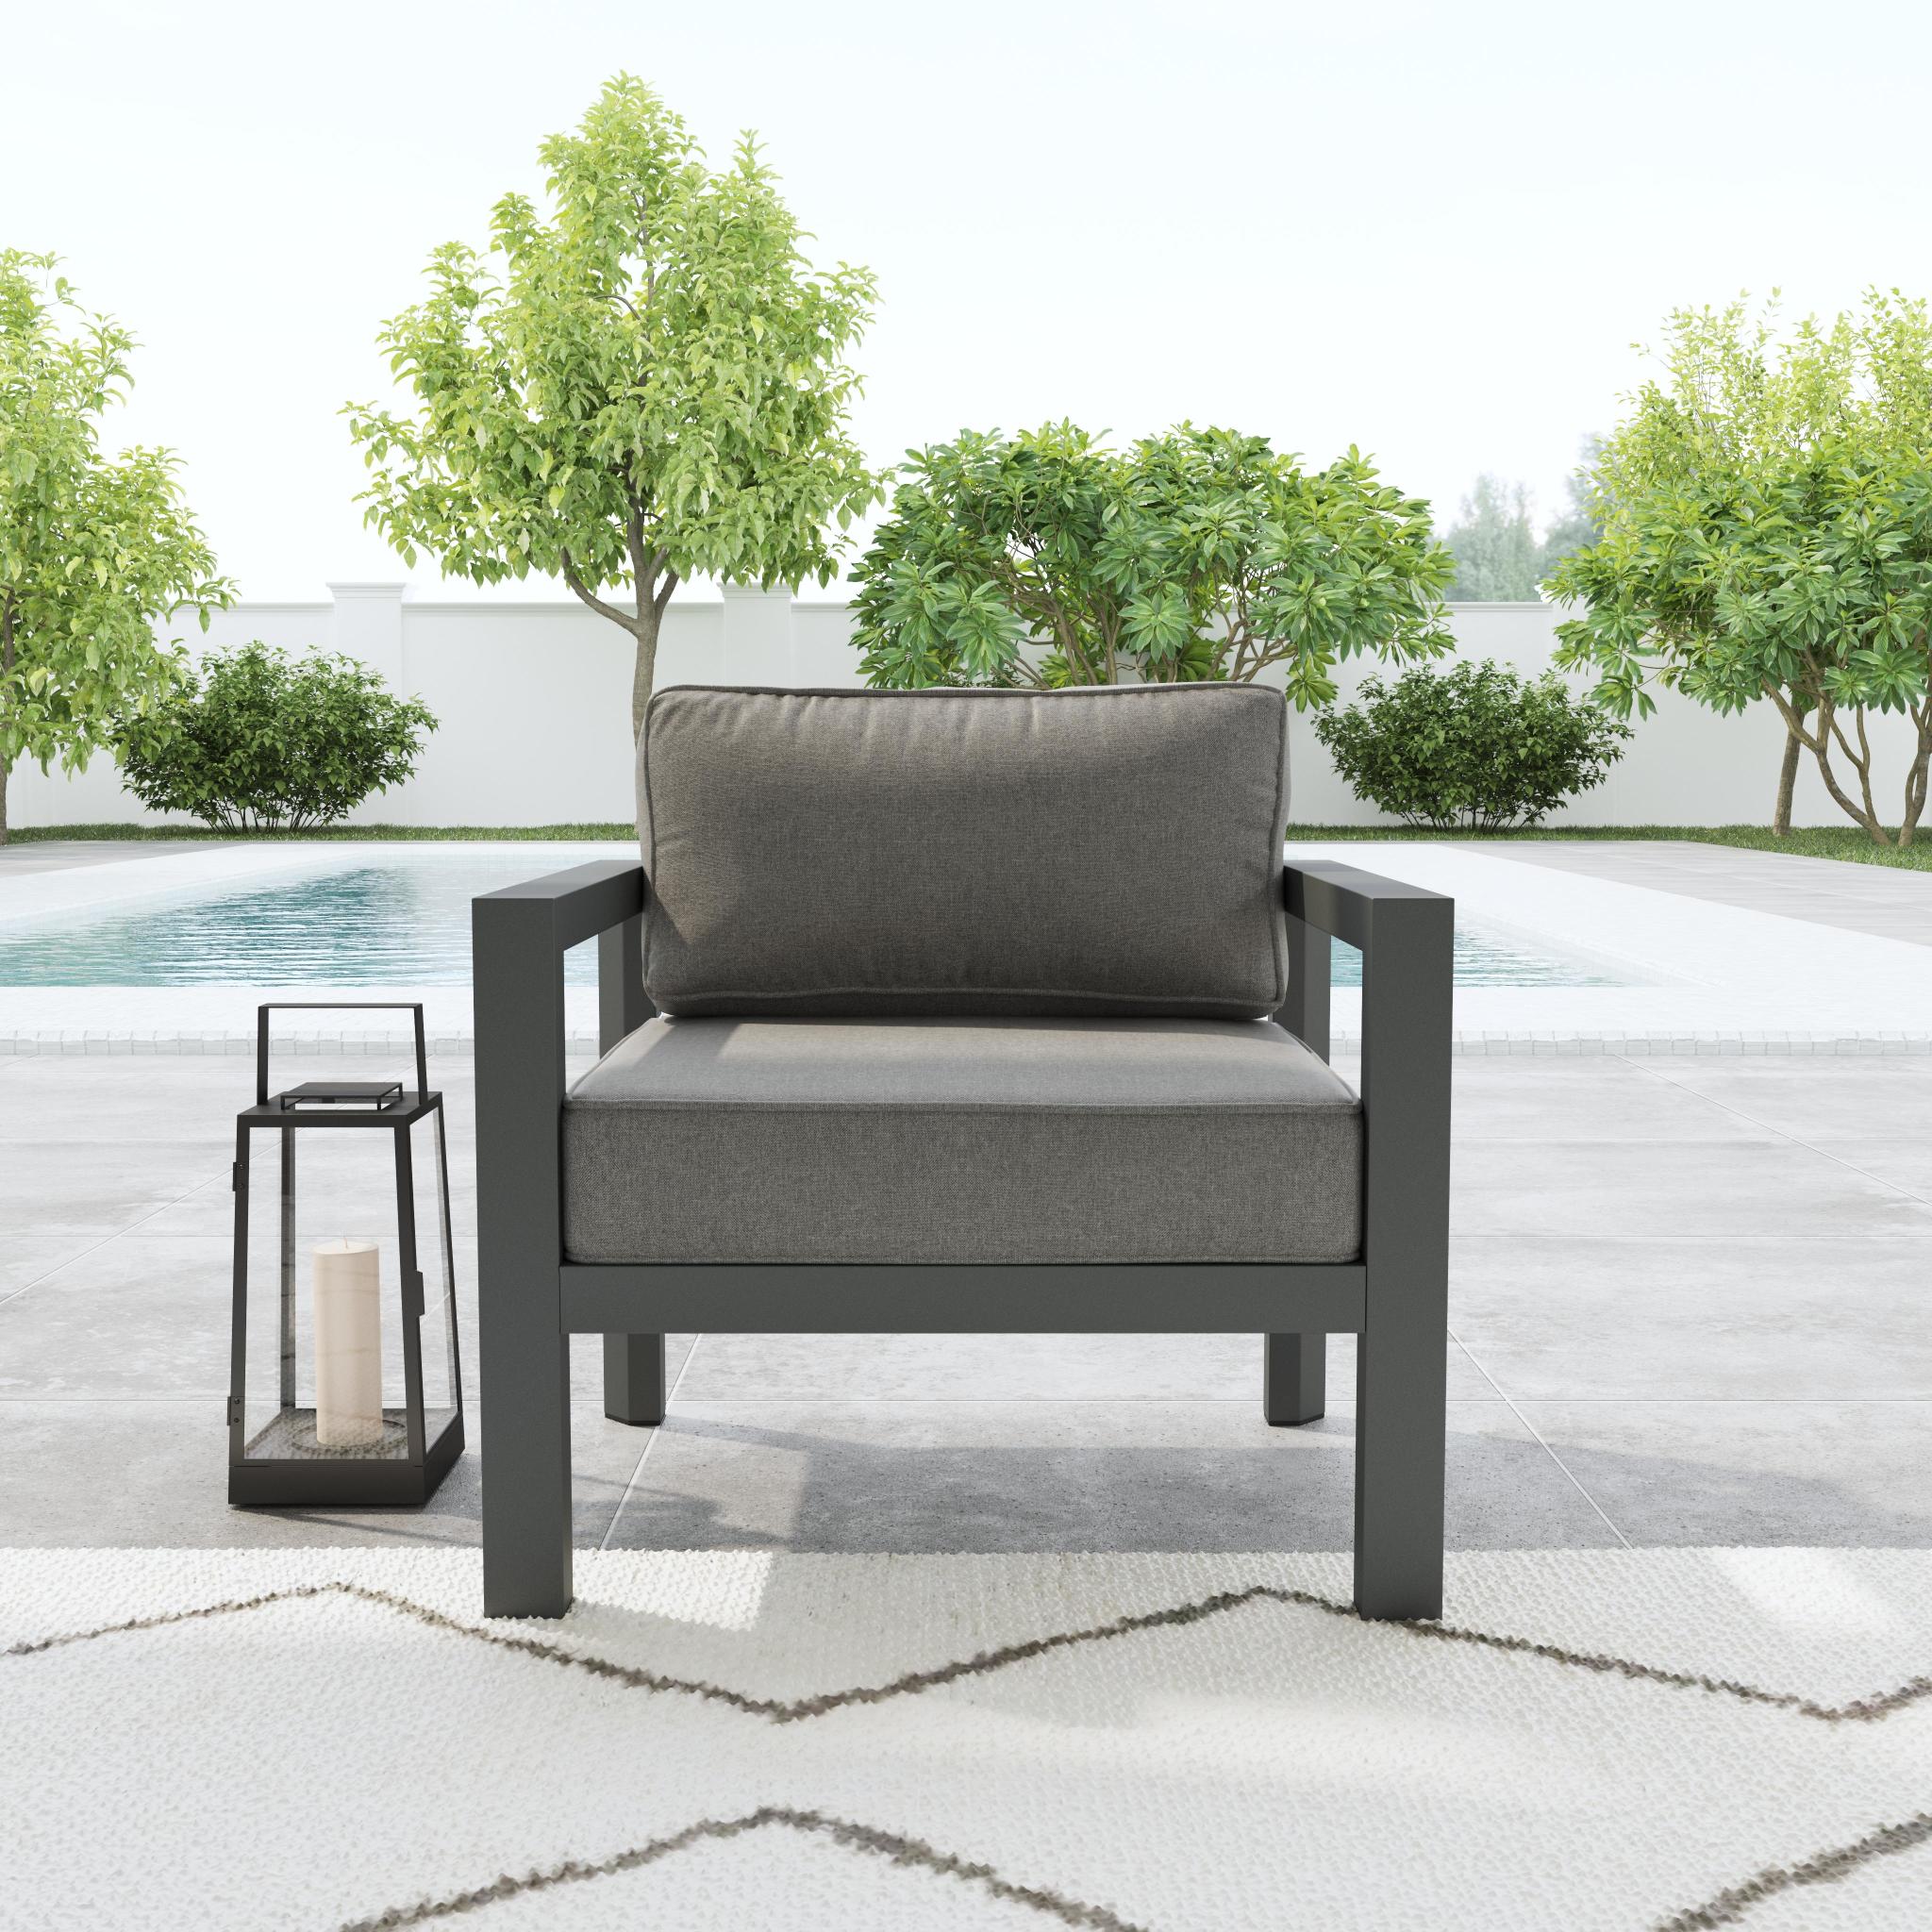 Homestyles Grayton Aluminum Outdoor Aluminum Lounge Chair in Gray - image 3 of 10